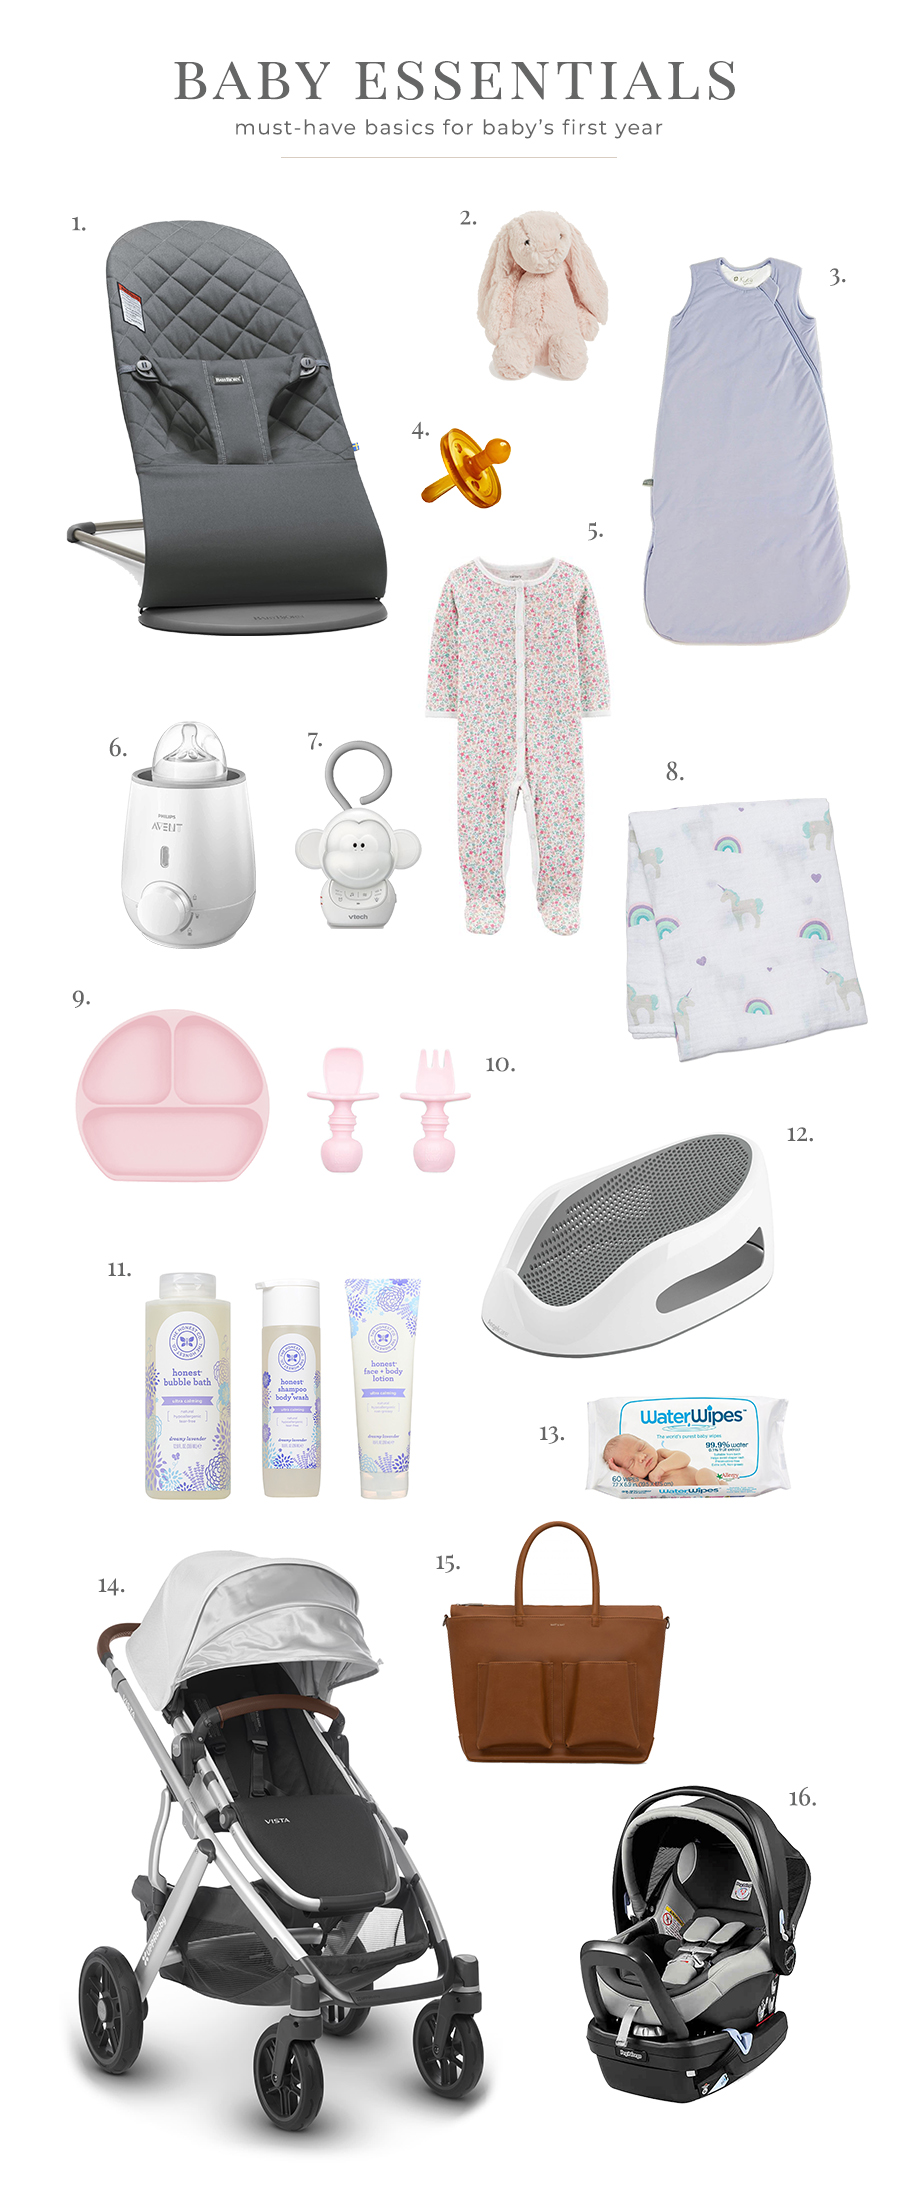 13 First Baby Must-Haves For the Best First Year